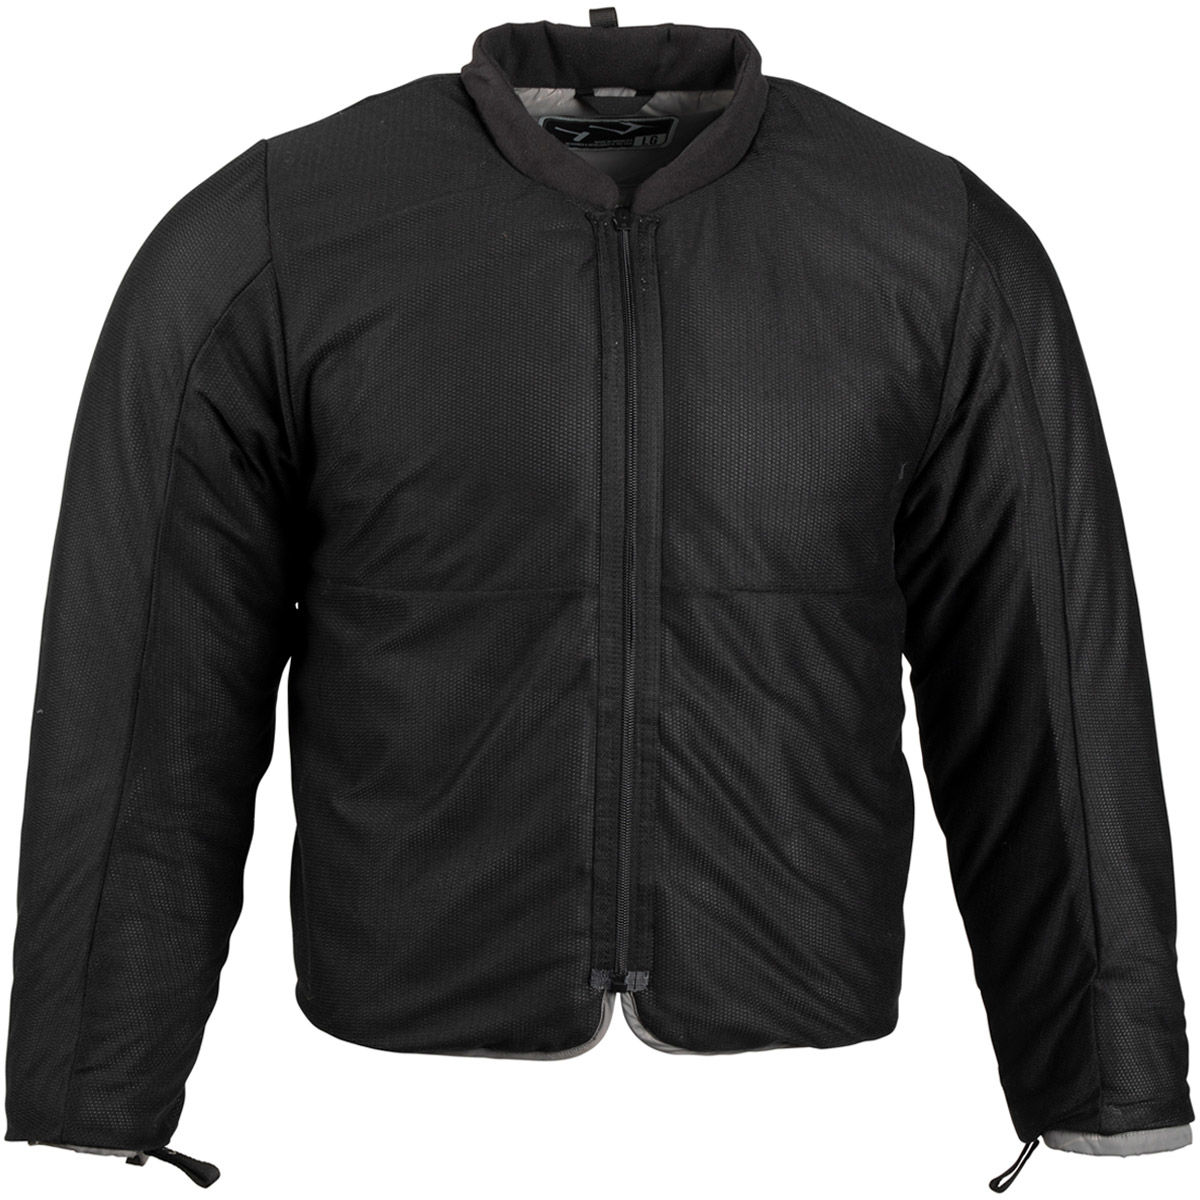 509 insulated jackets for men r series 200 ignite liner